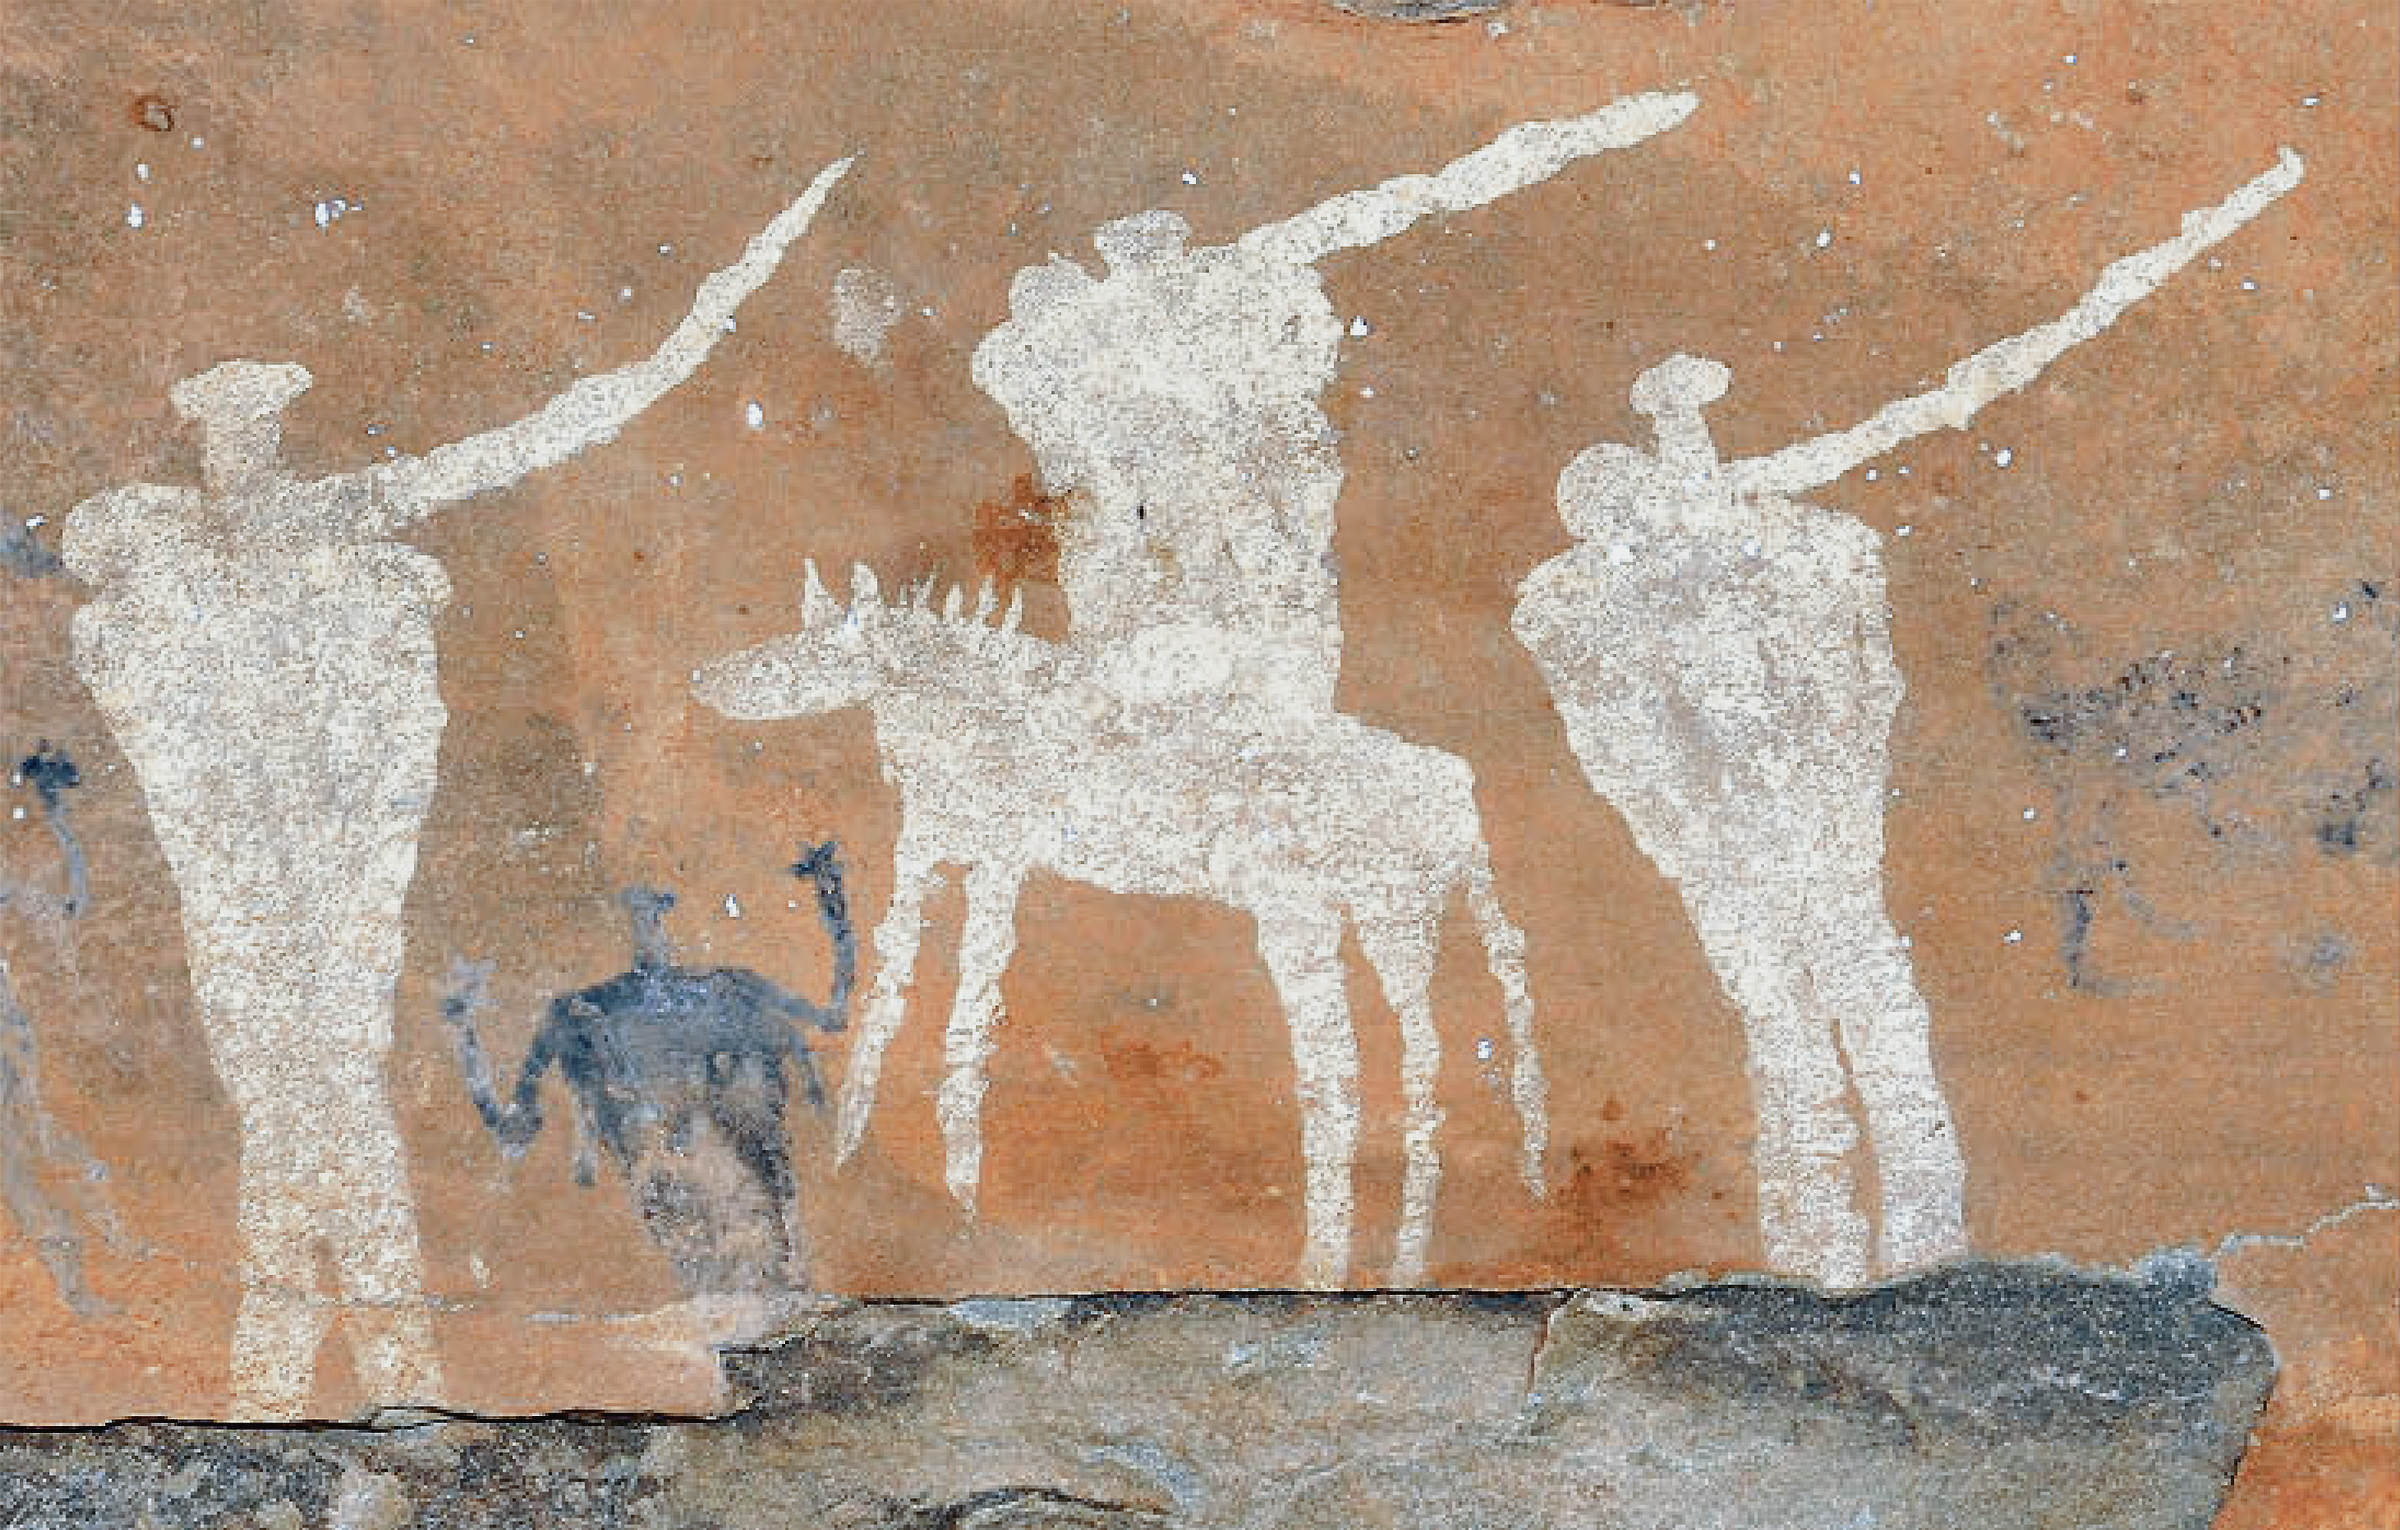 Painting from a shelter in the Zuurberg showing: Figures with guns, one mounted